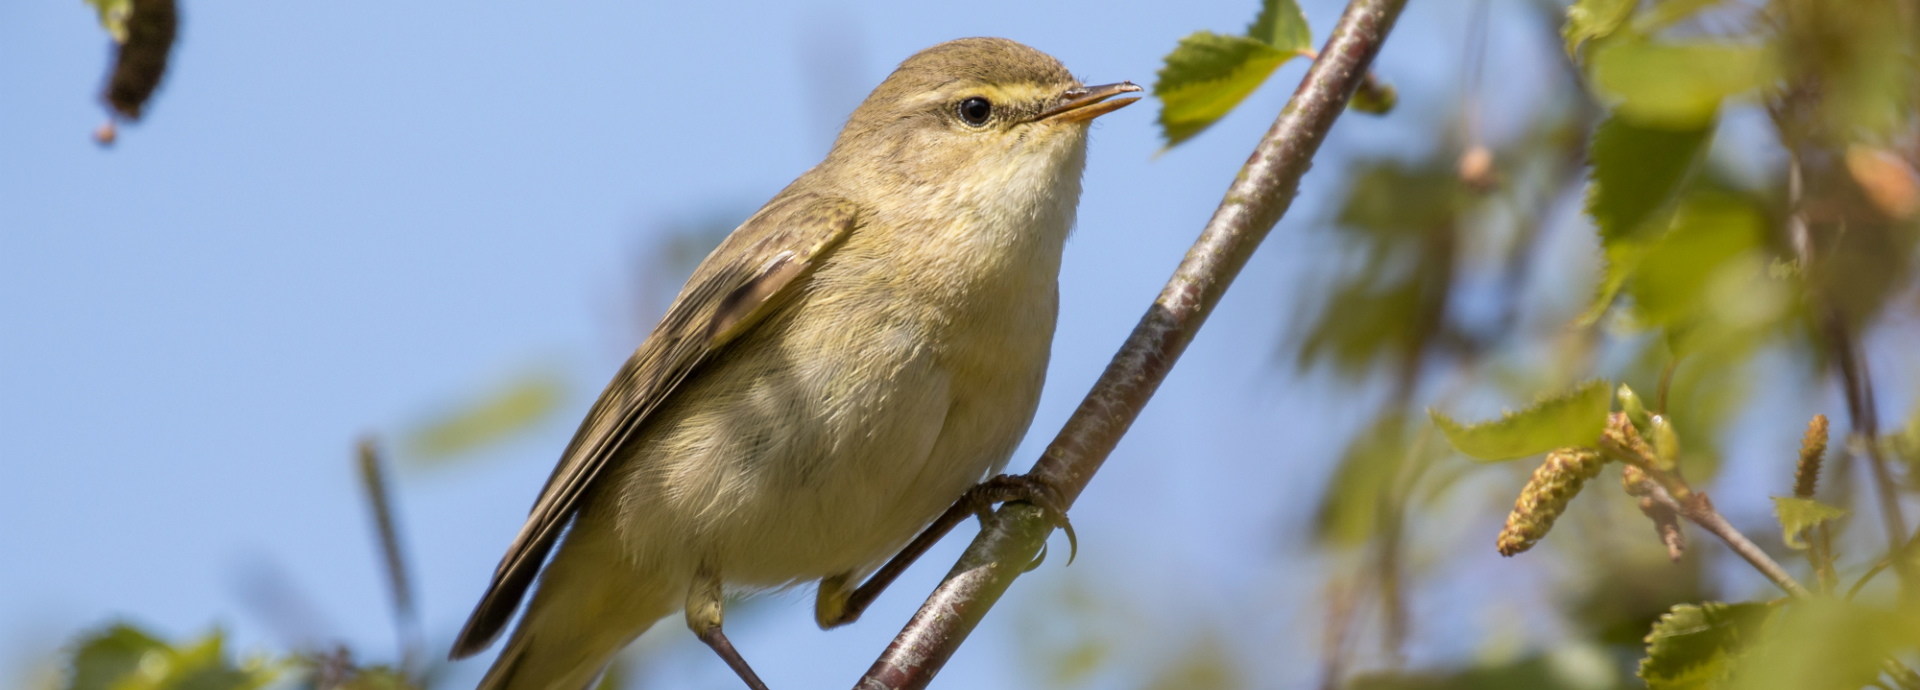 Willow warbler sitting in a tree.